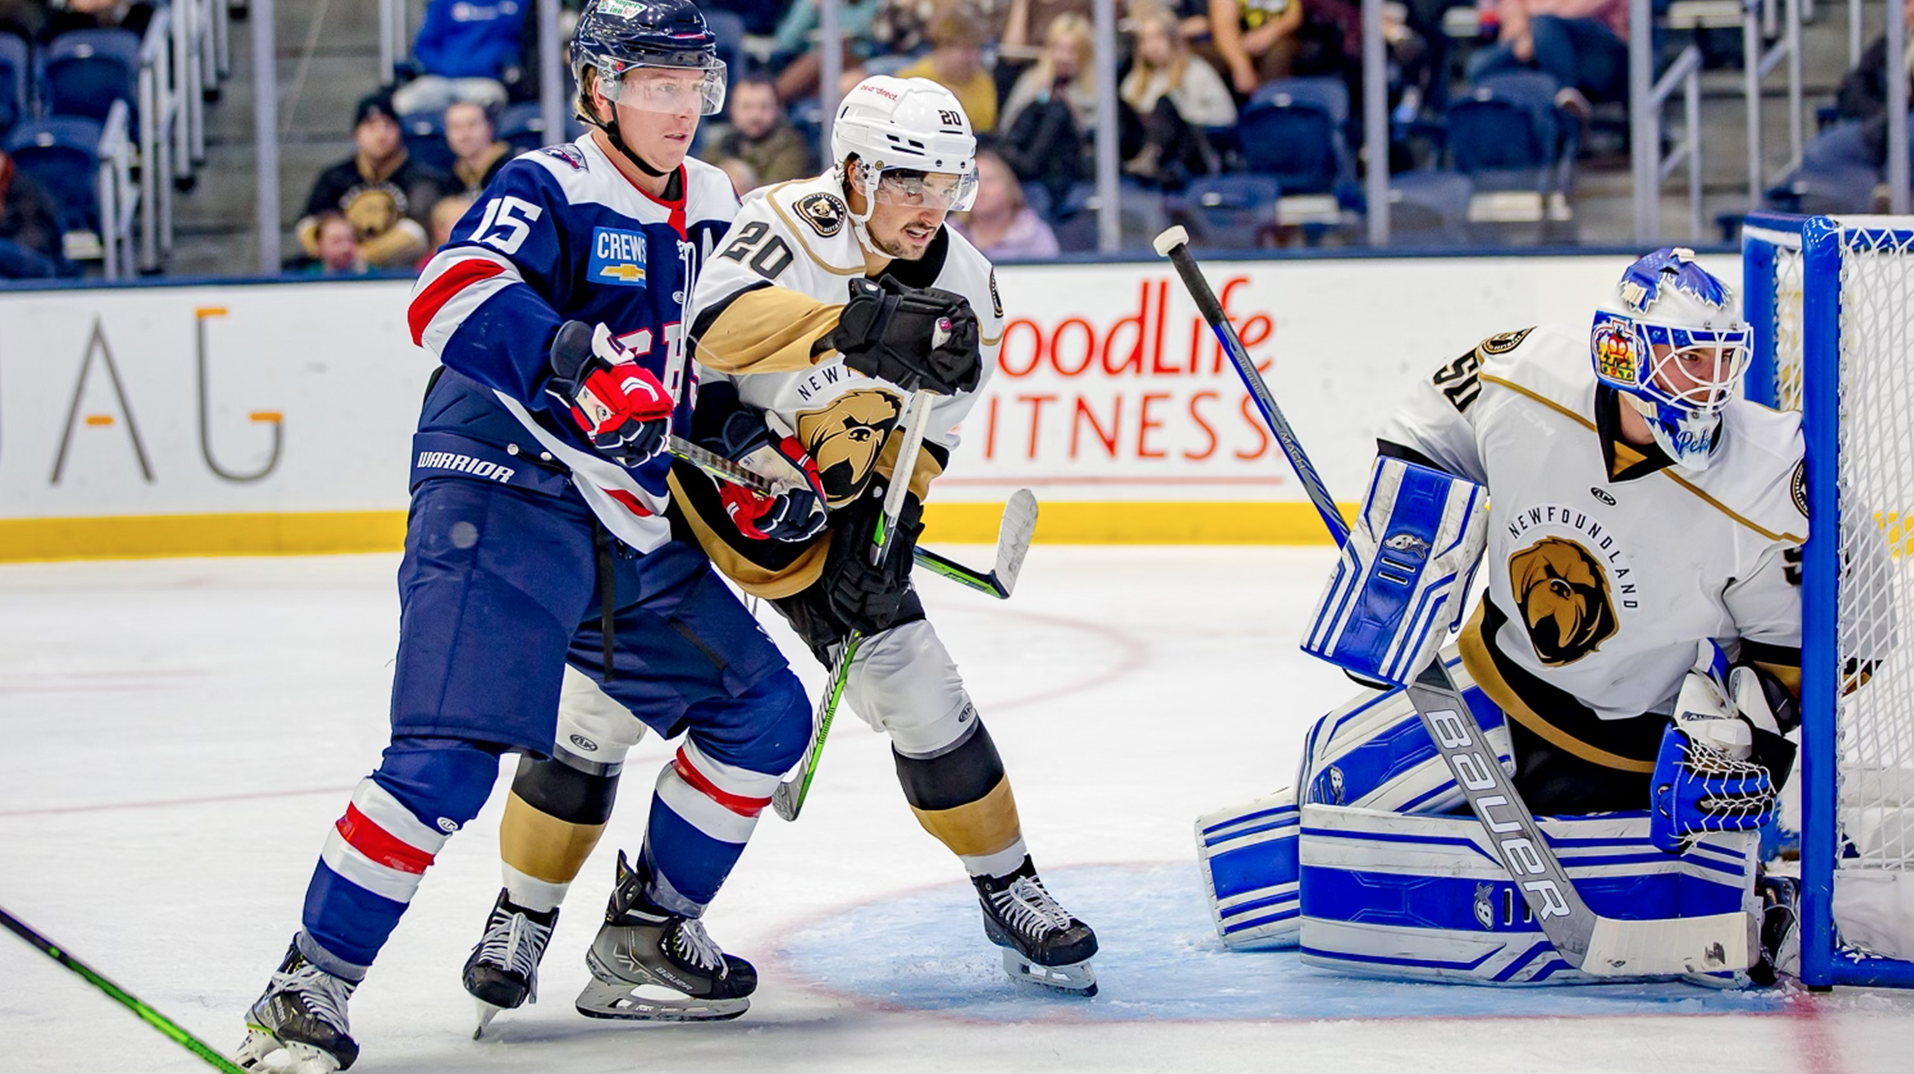 Growlers win 2nd game in franchise history in thriller against